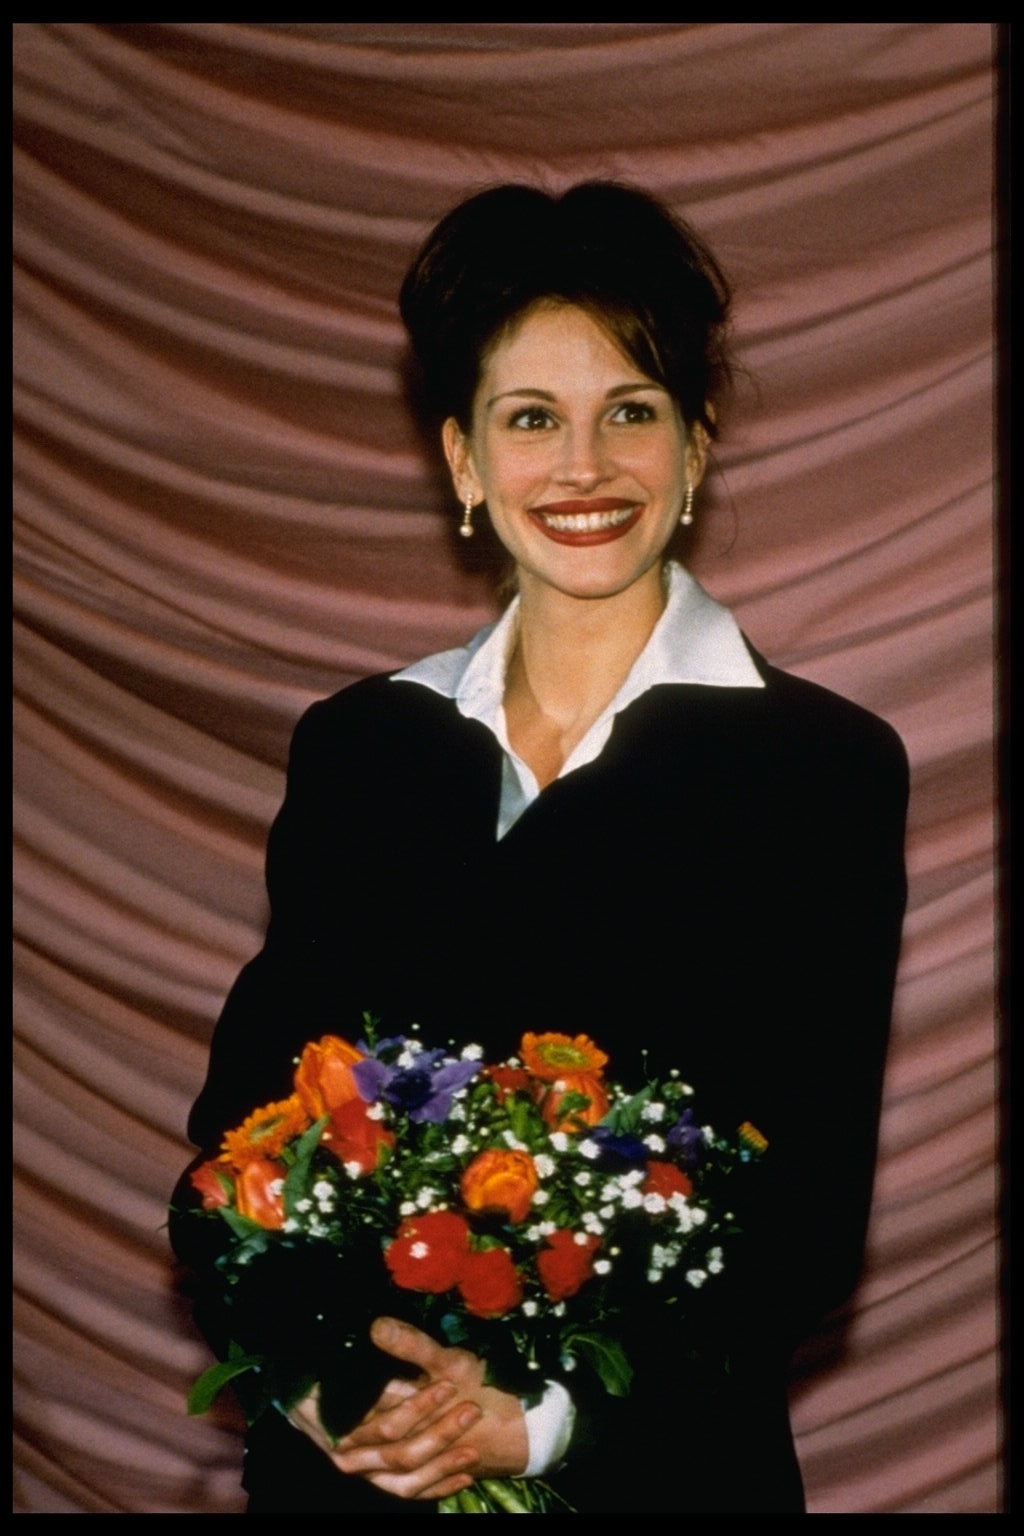 Julia Roberts at the 46th Berlin International Film Festival on February 23, 1996 | Source: Getty Images